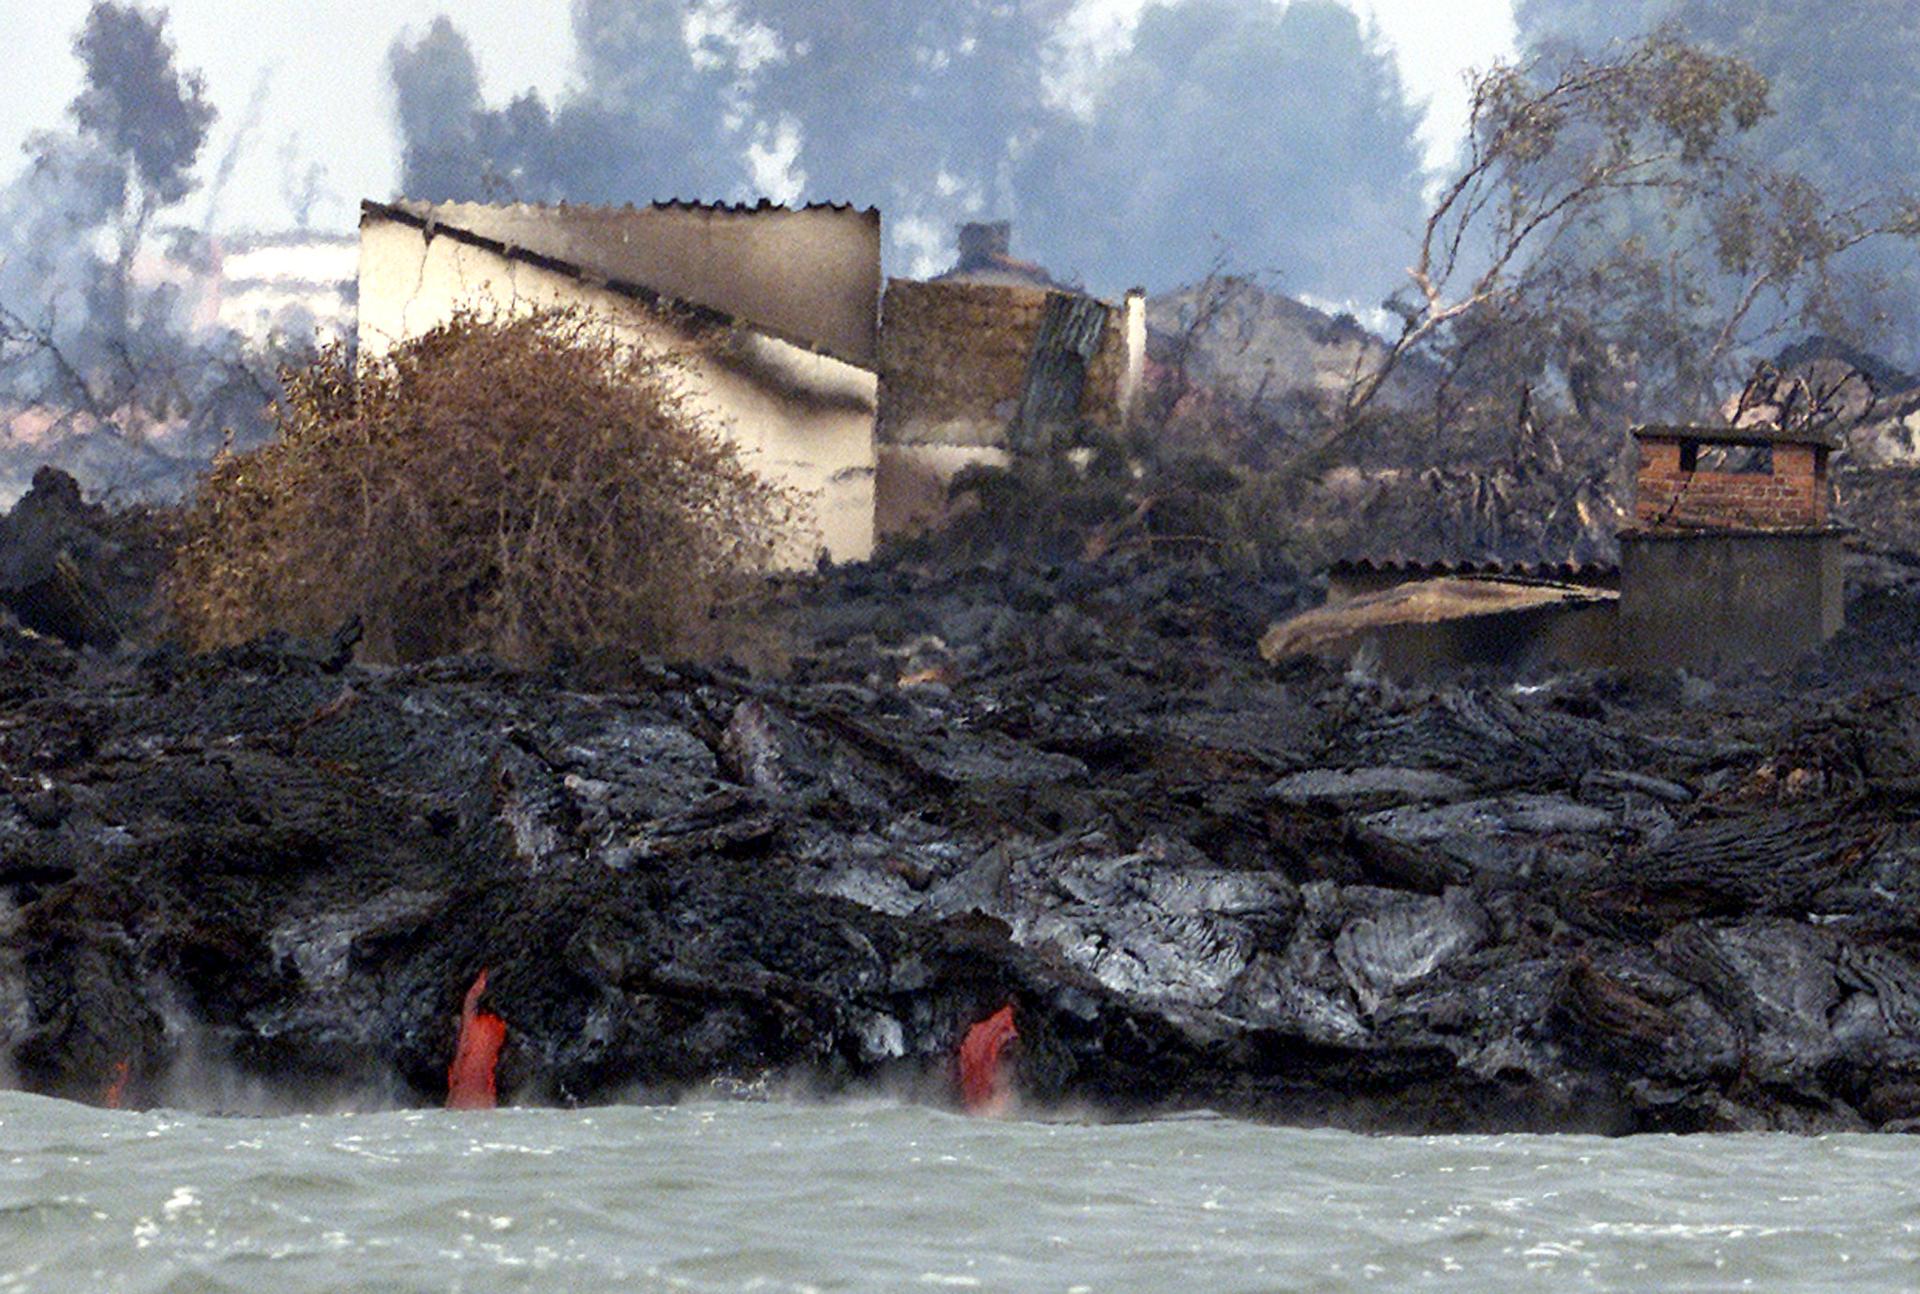 Molten Lava pours into lake Kivu in front of burnt out houses in Goma January 21, 2002.